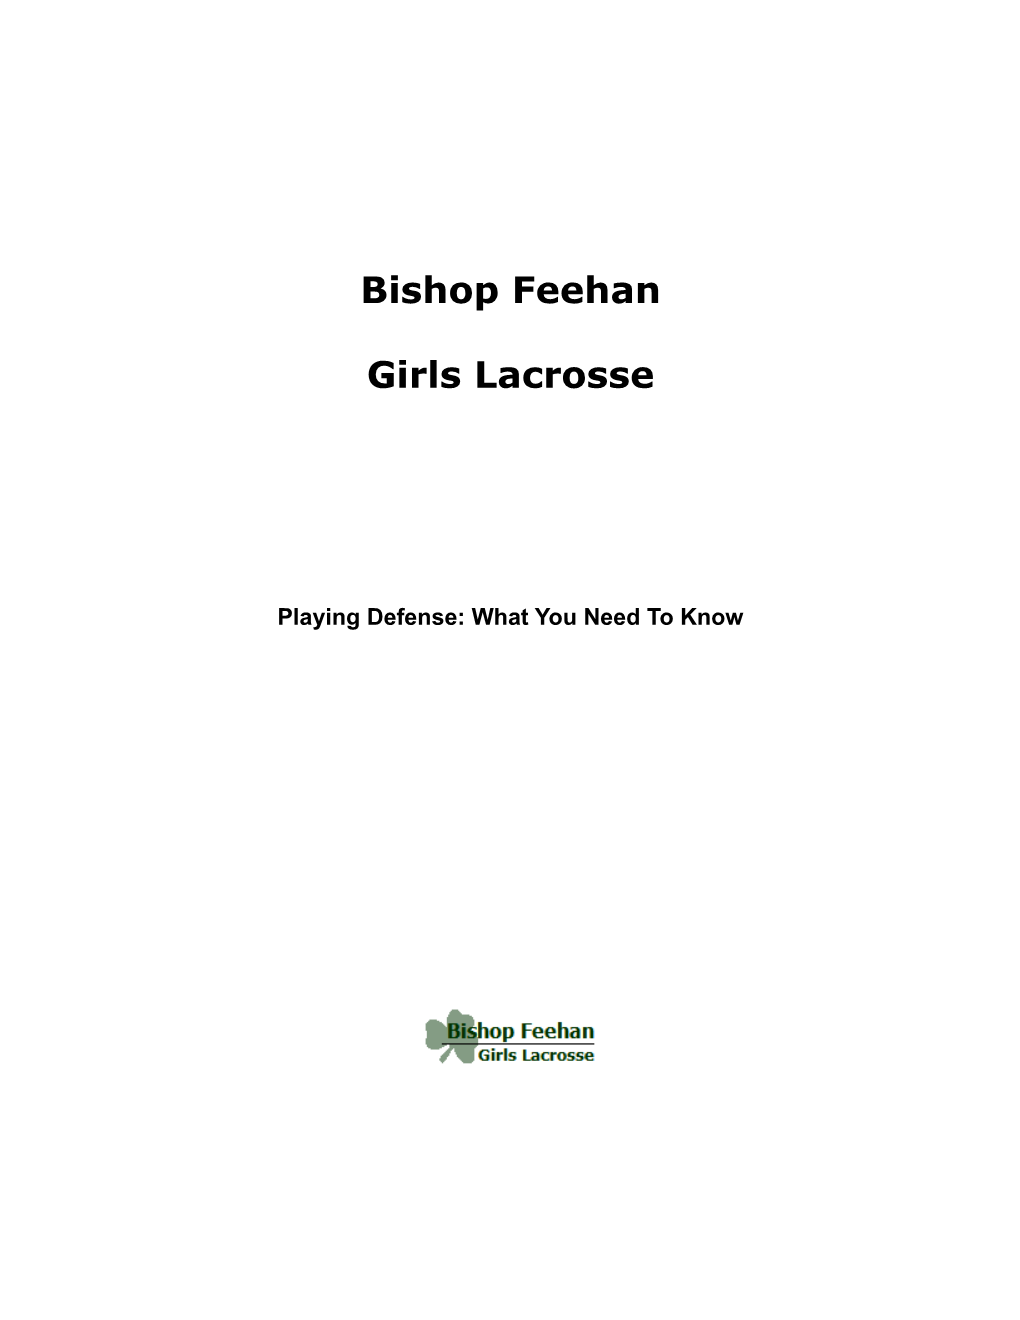 Girls Lacrosse Defense: What You Need to Know